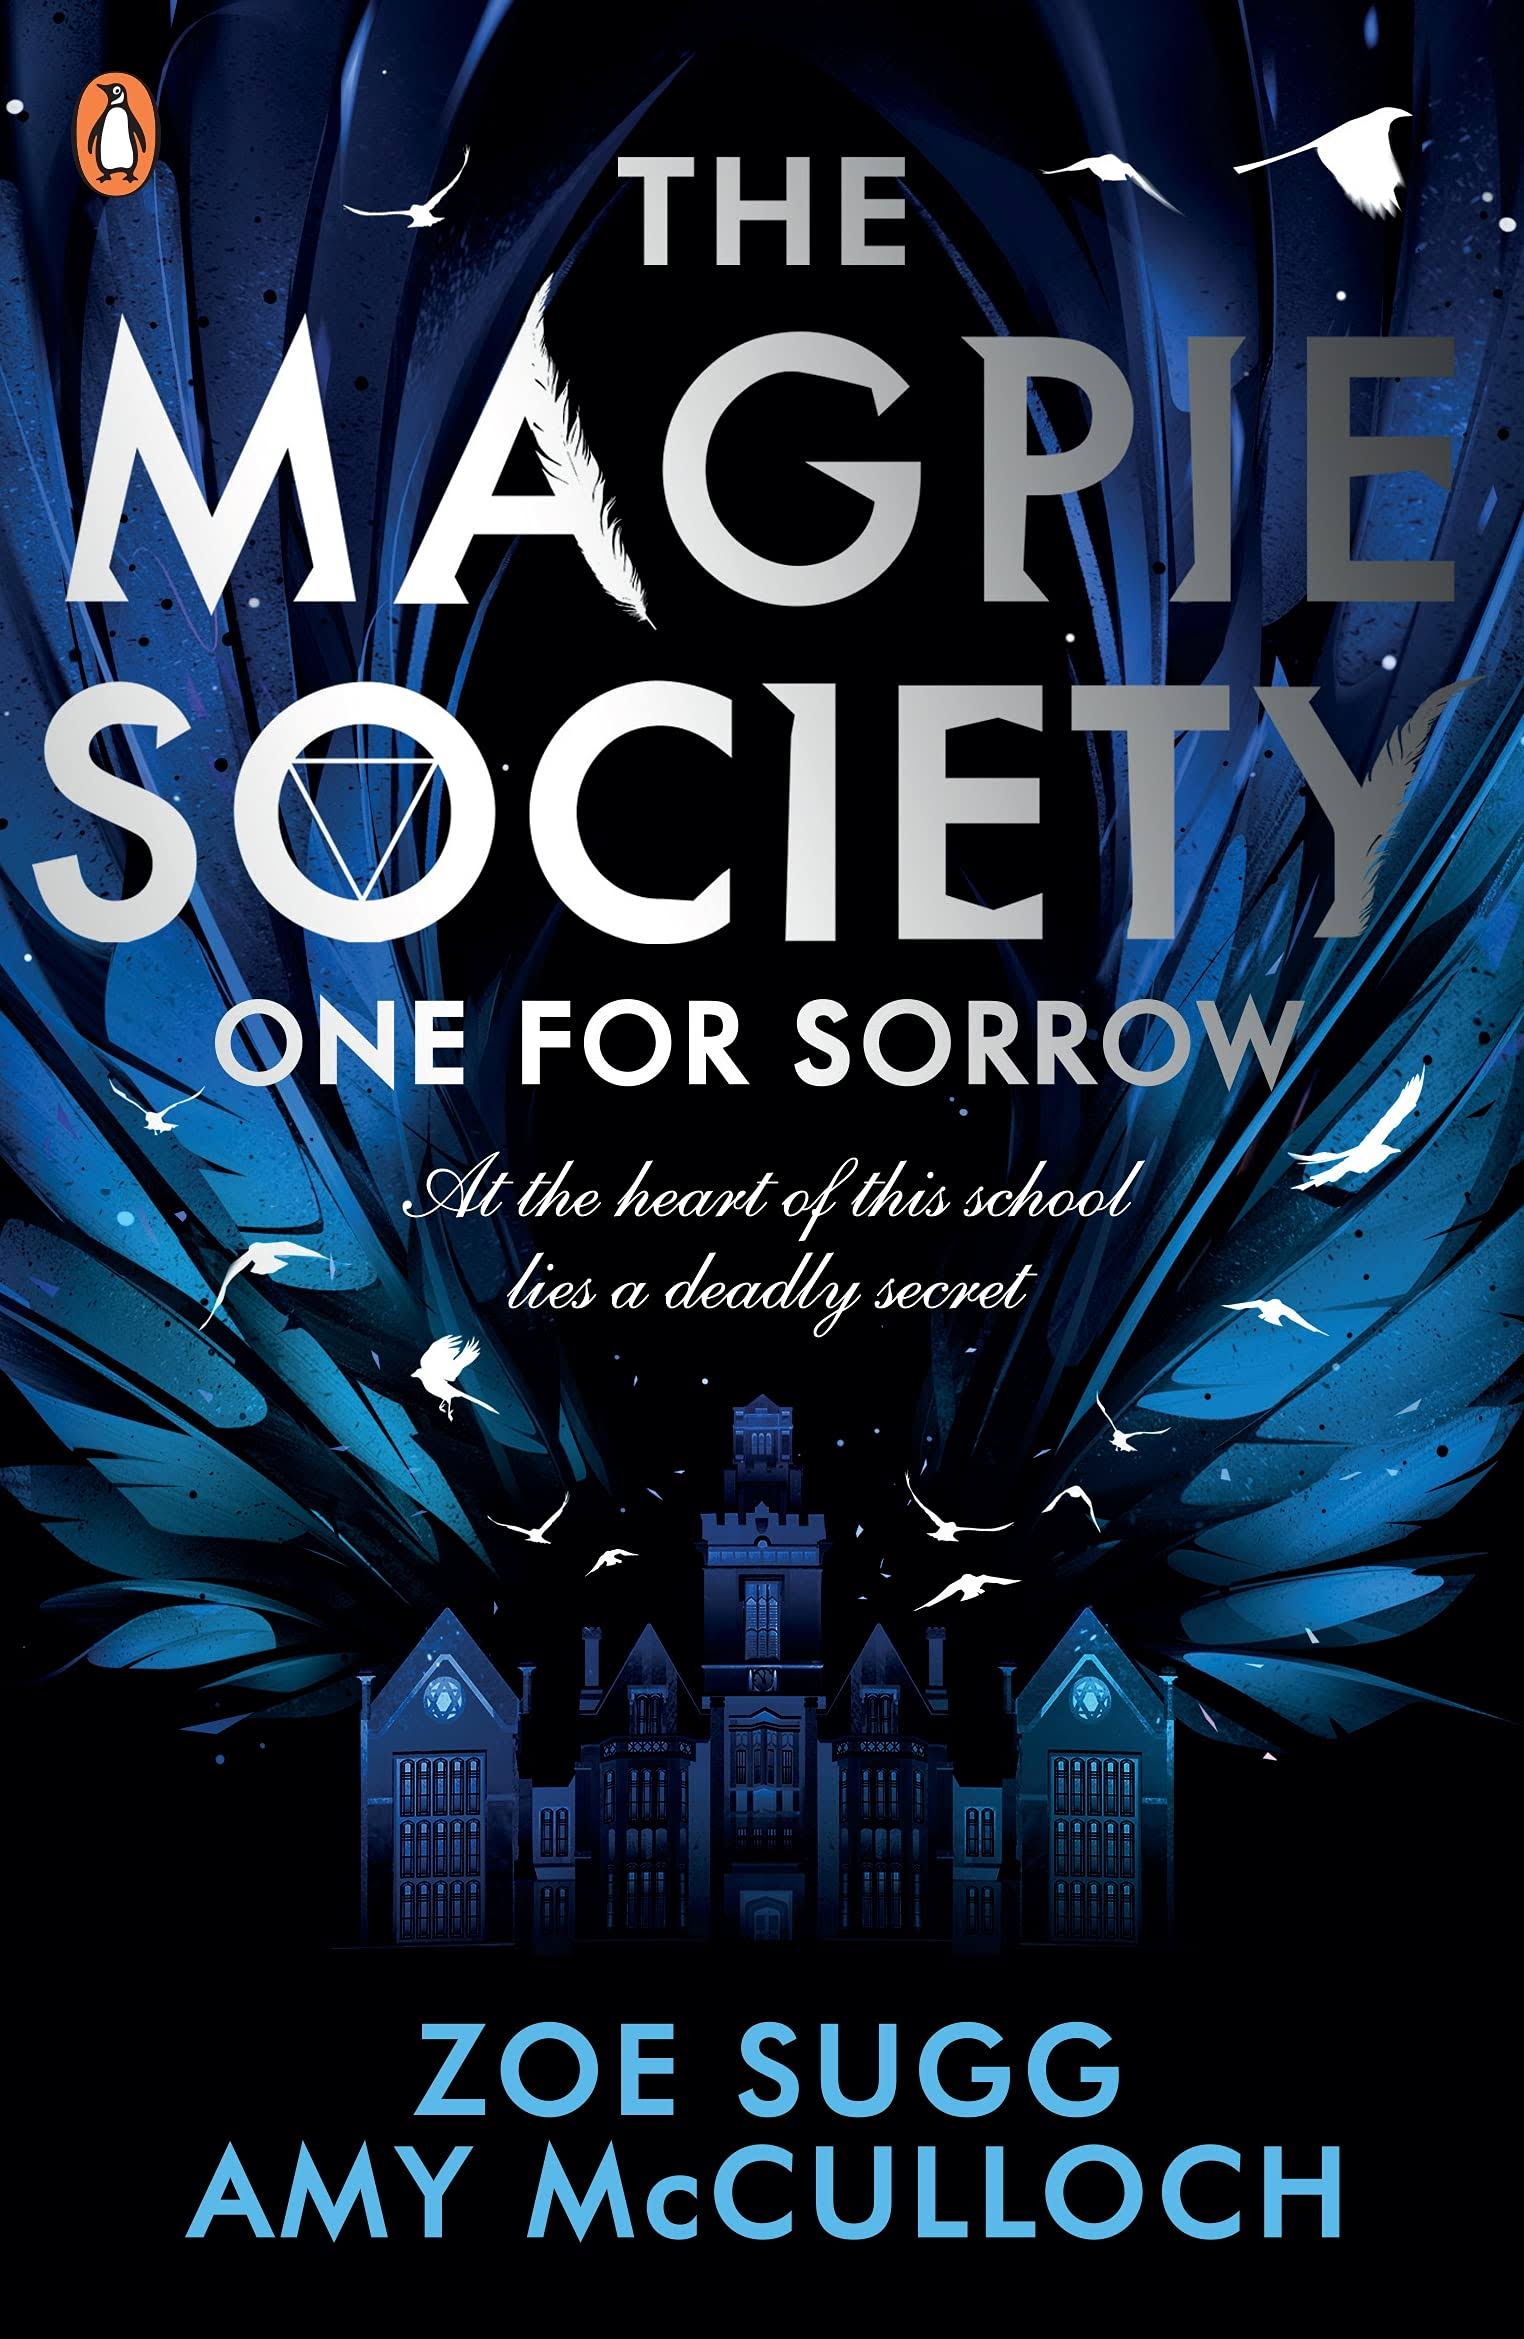 The Magpie Society: One for Sorrow [Book]